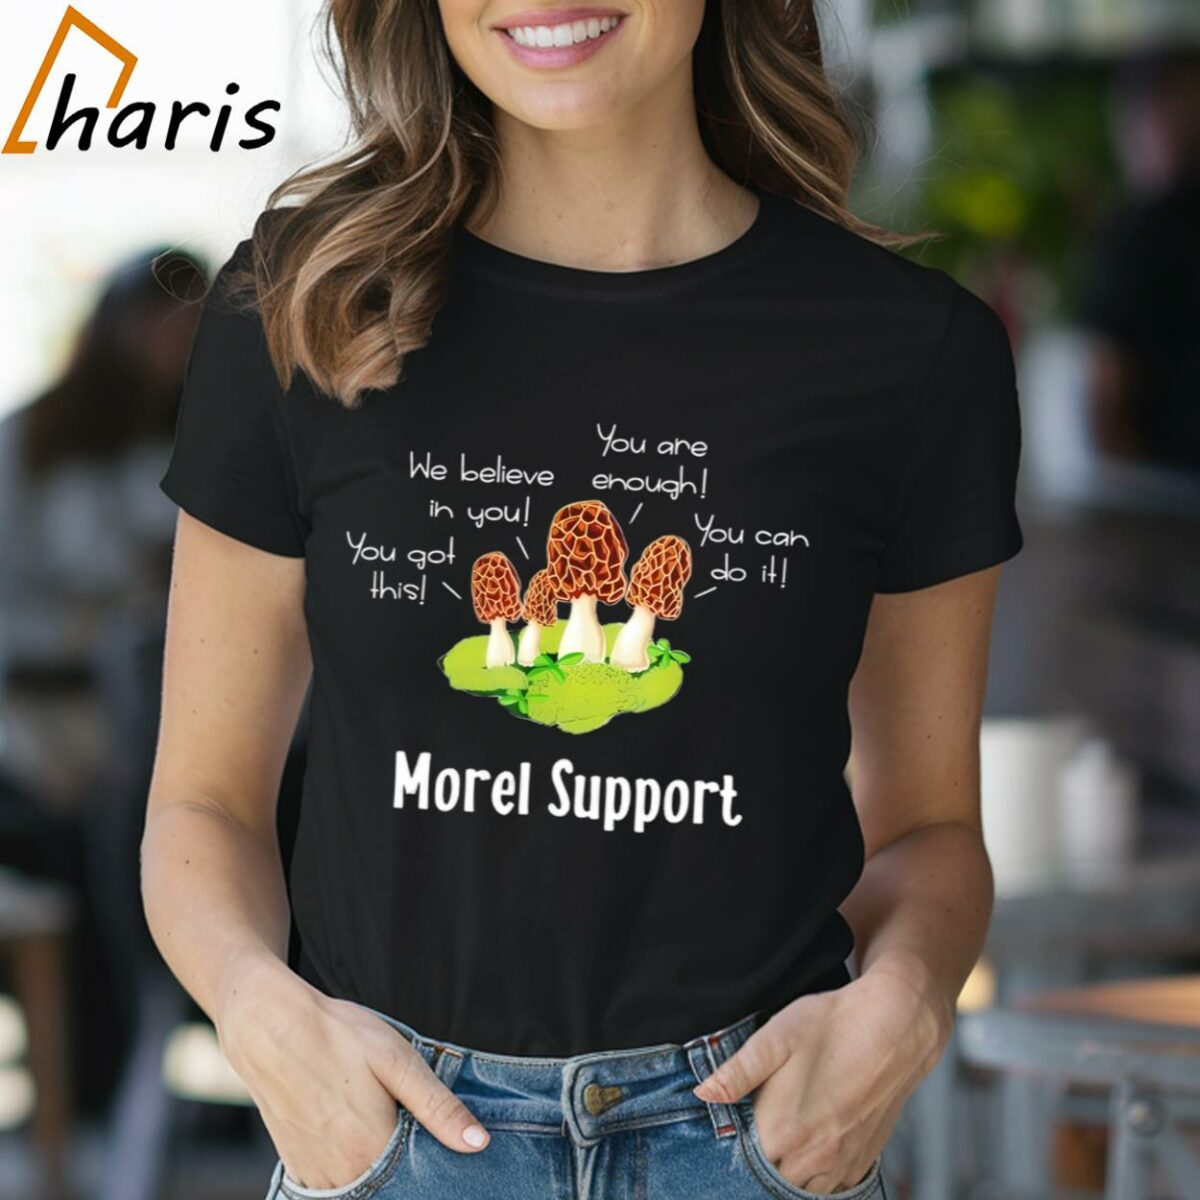 Mushroom You Got This We Believe In You You Can Do It You Are Enough Morel Support Shirt 1 Shirt